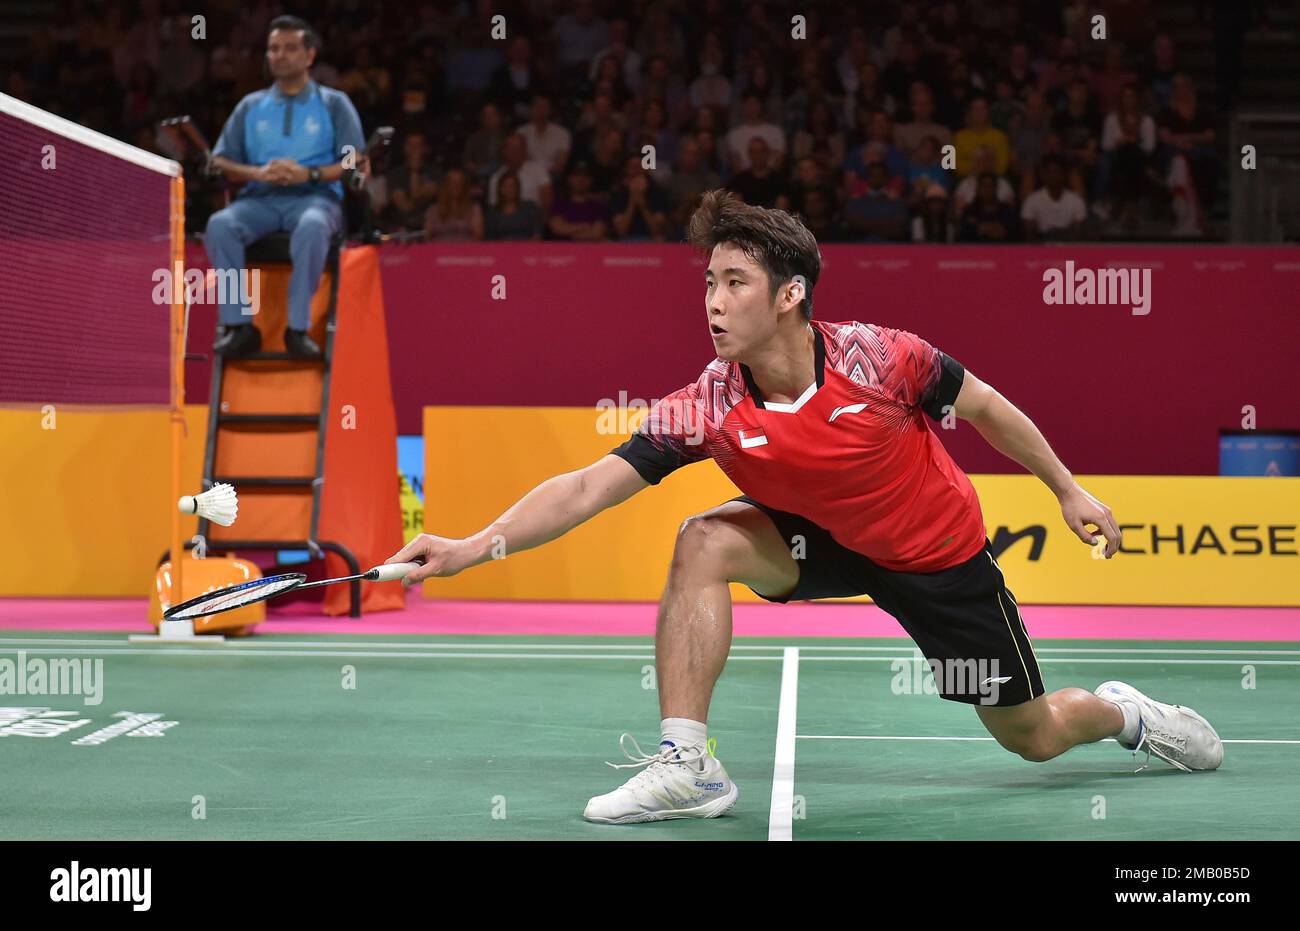 Singapores Yew Kean Loh competes against Englands Toby Penty during the mens single Badminton match at the Commonwealth Games in Birmingham, England, Saturday, July 30, 2022